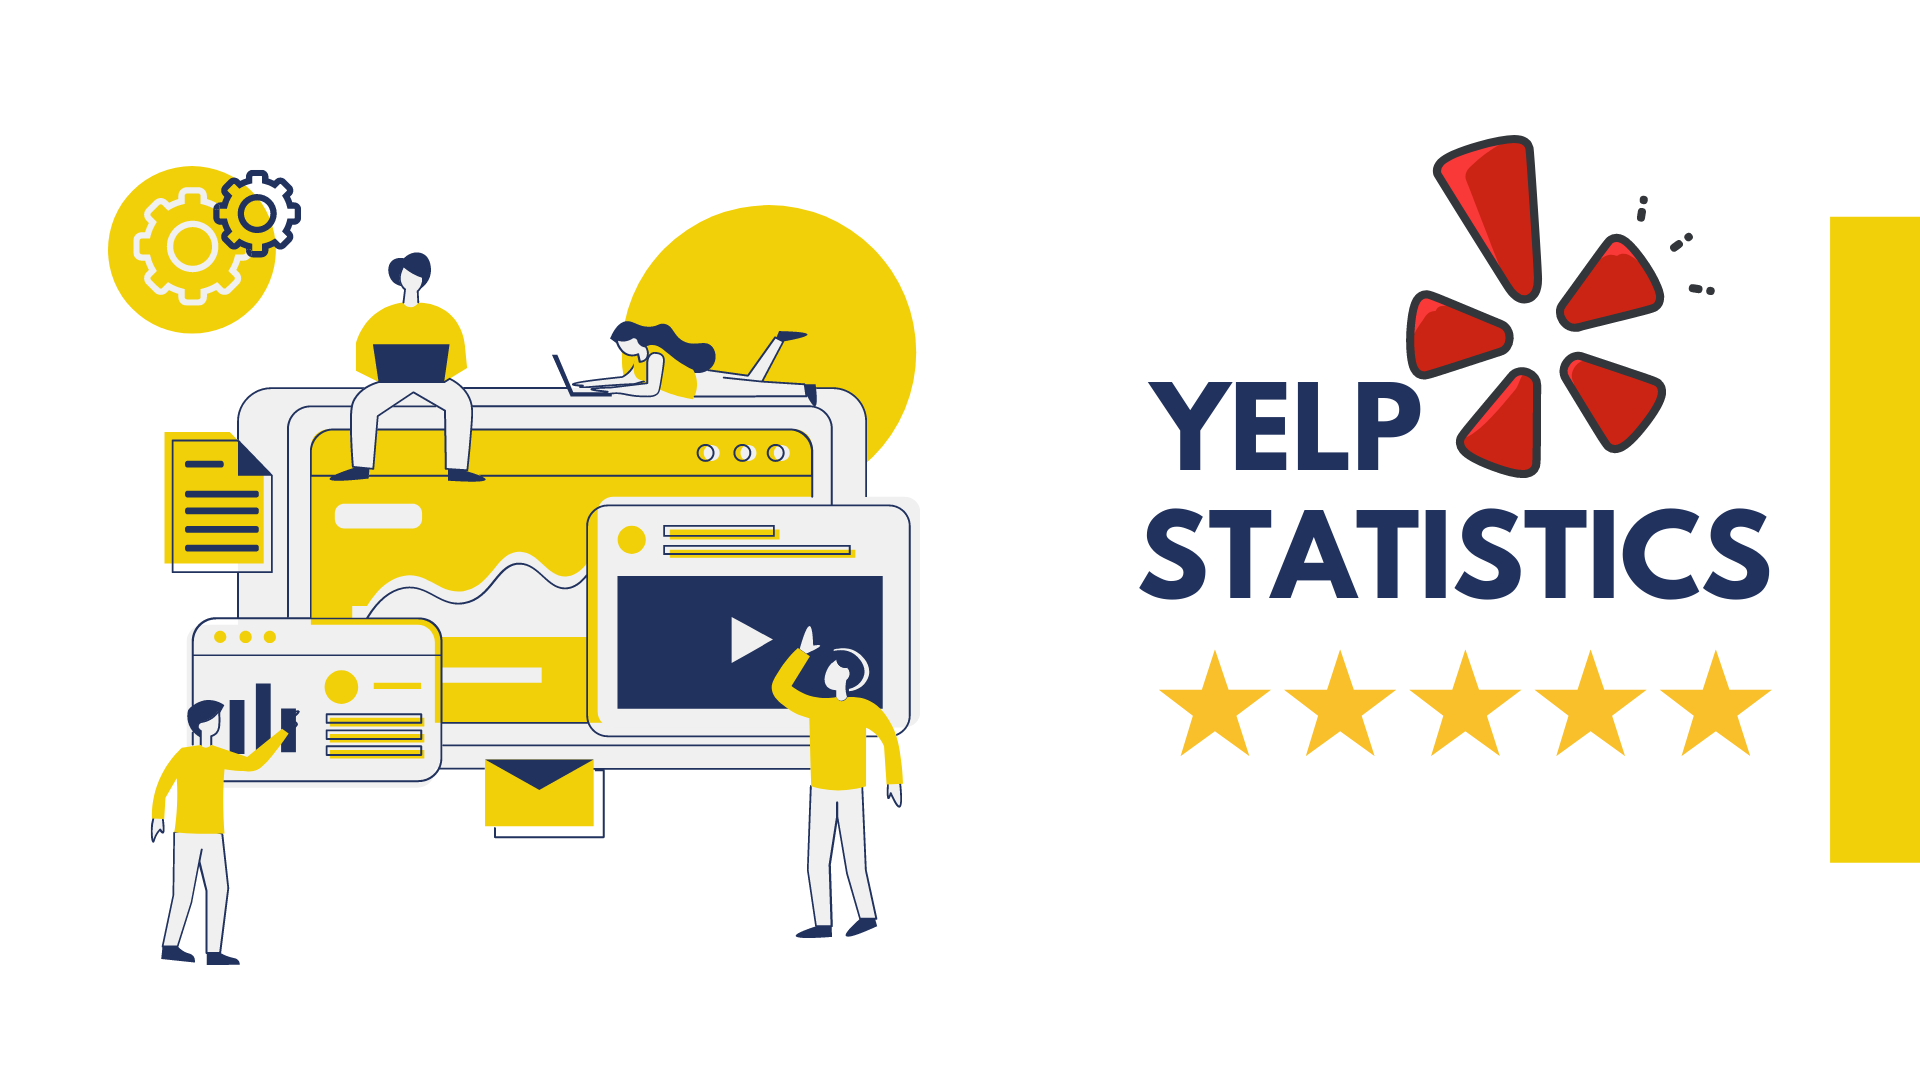 Track your reports through the Yelp ratings system to see how your business is performing 